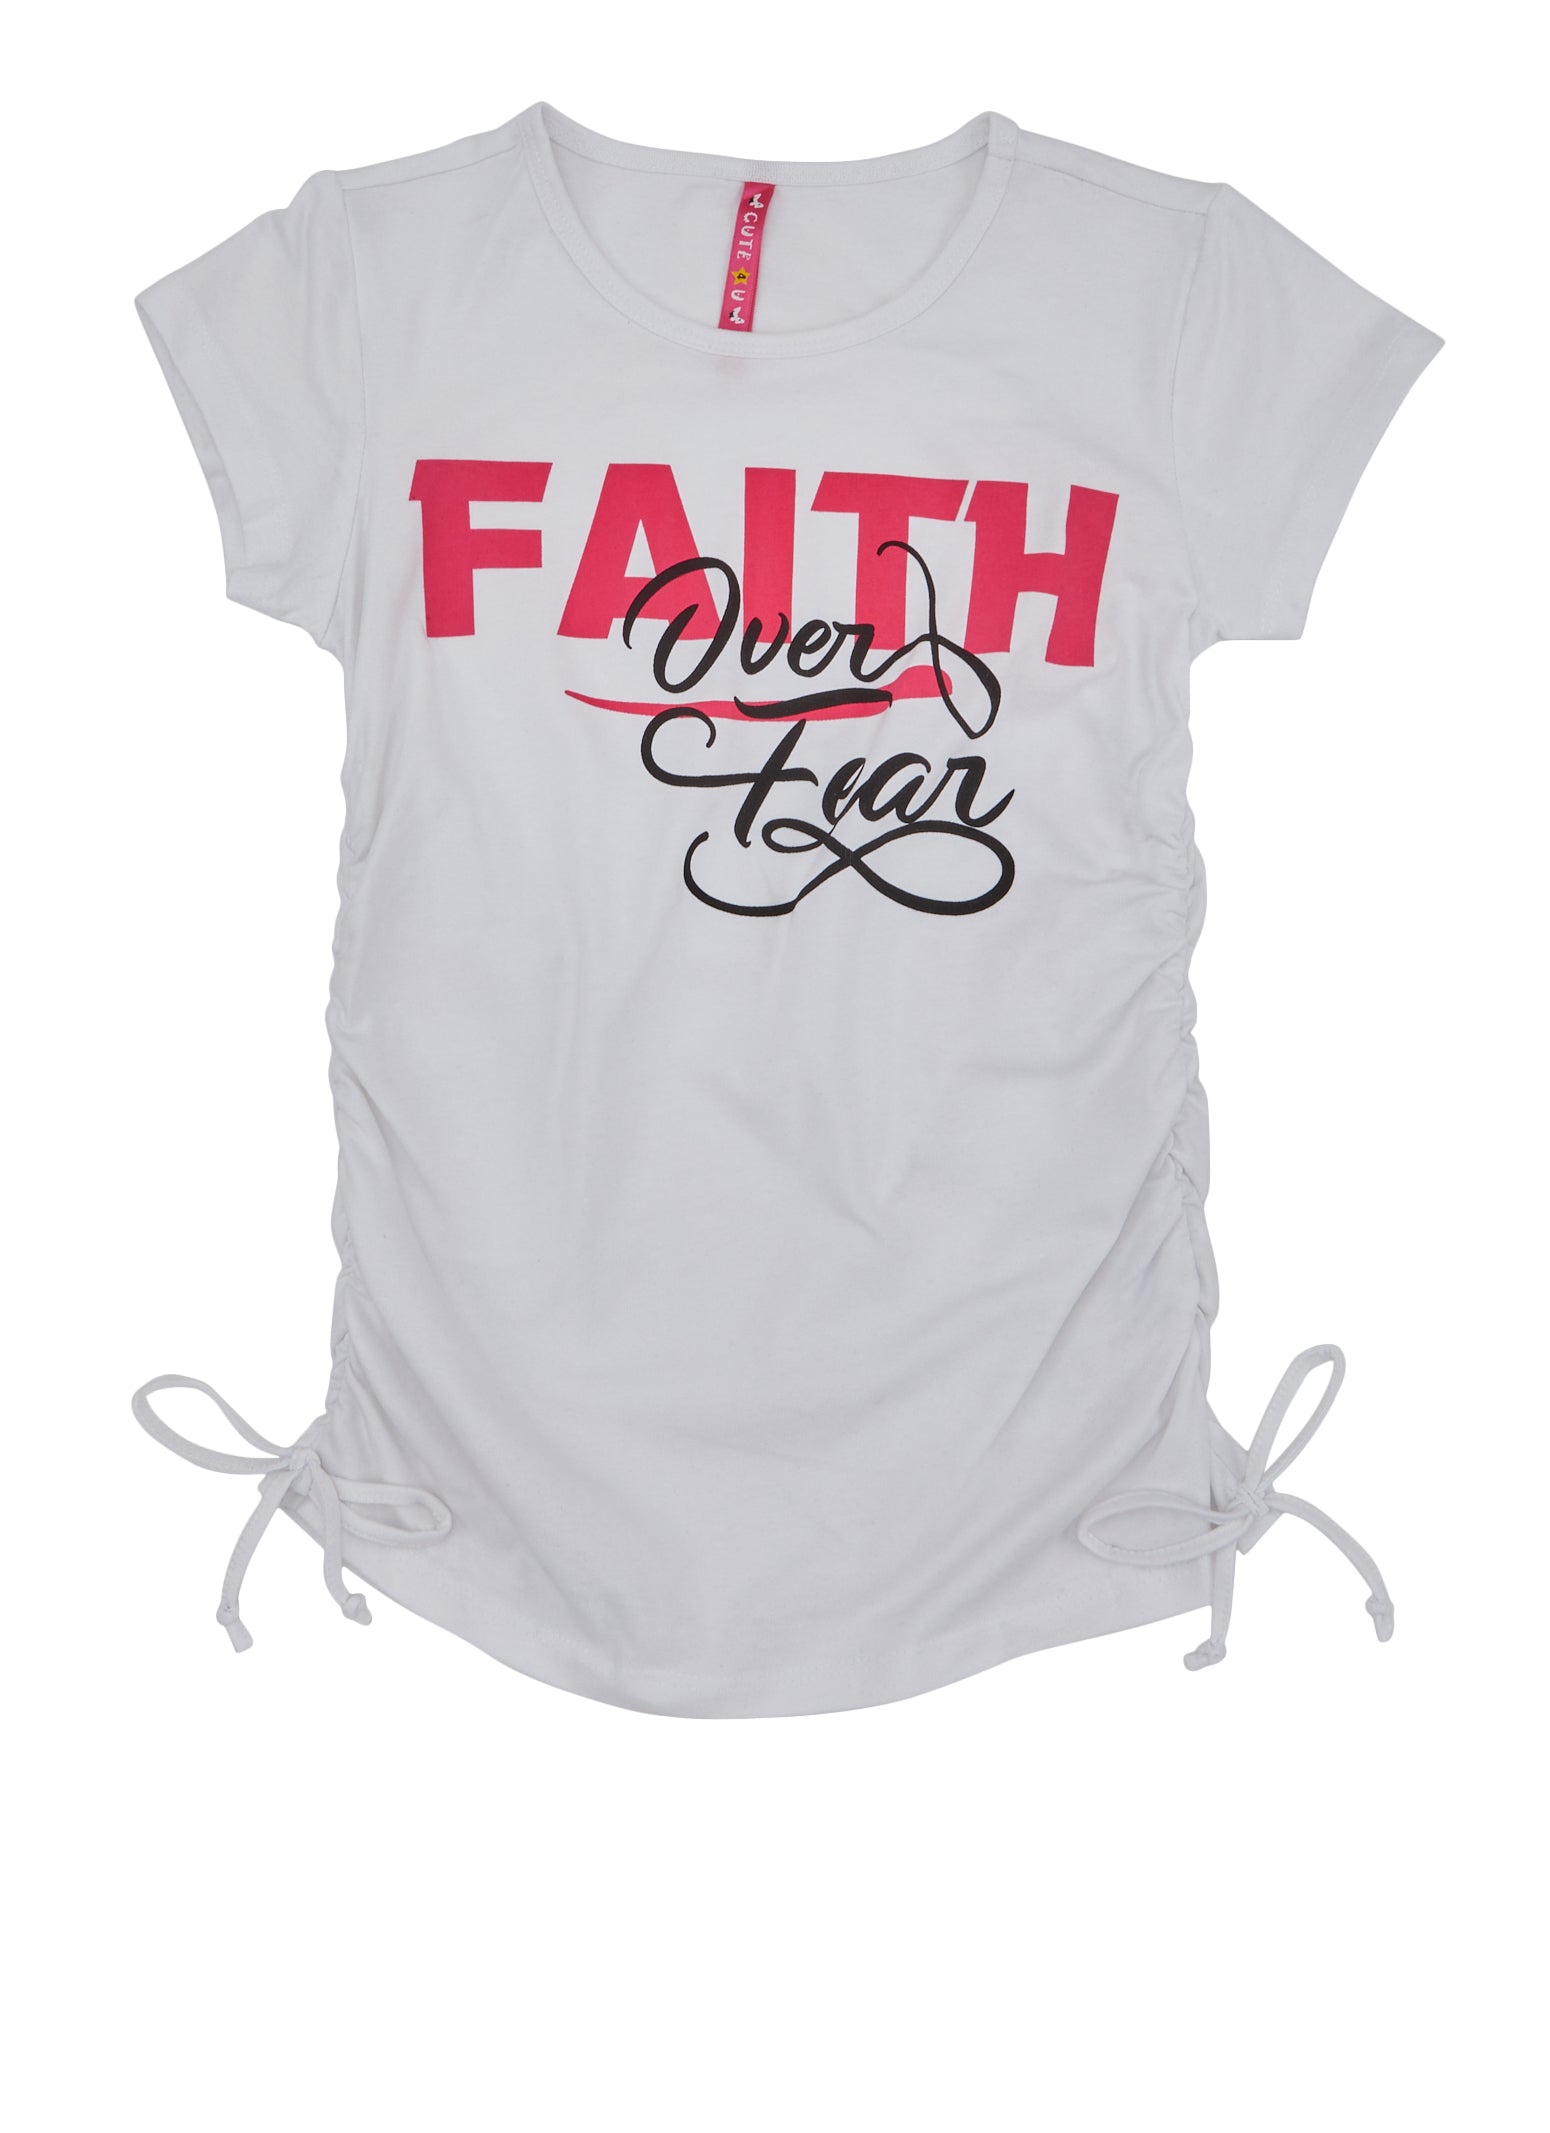 Girls Faith Over Fear Ruched Graphic Tee, White, Size 7-8